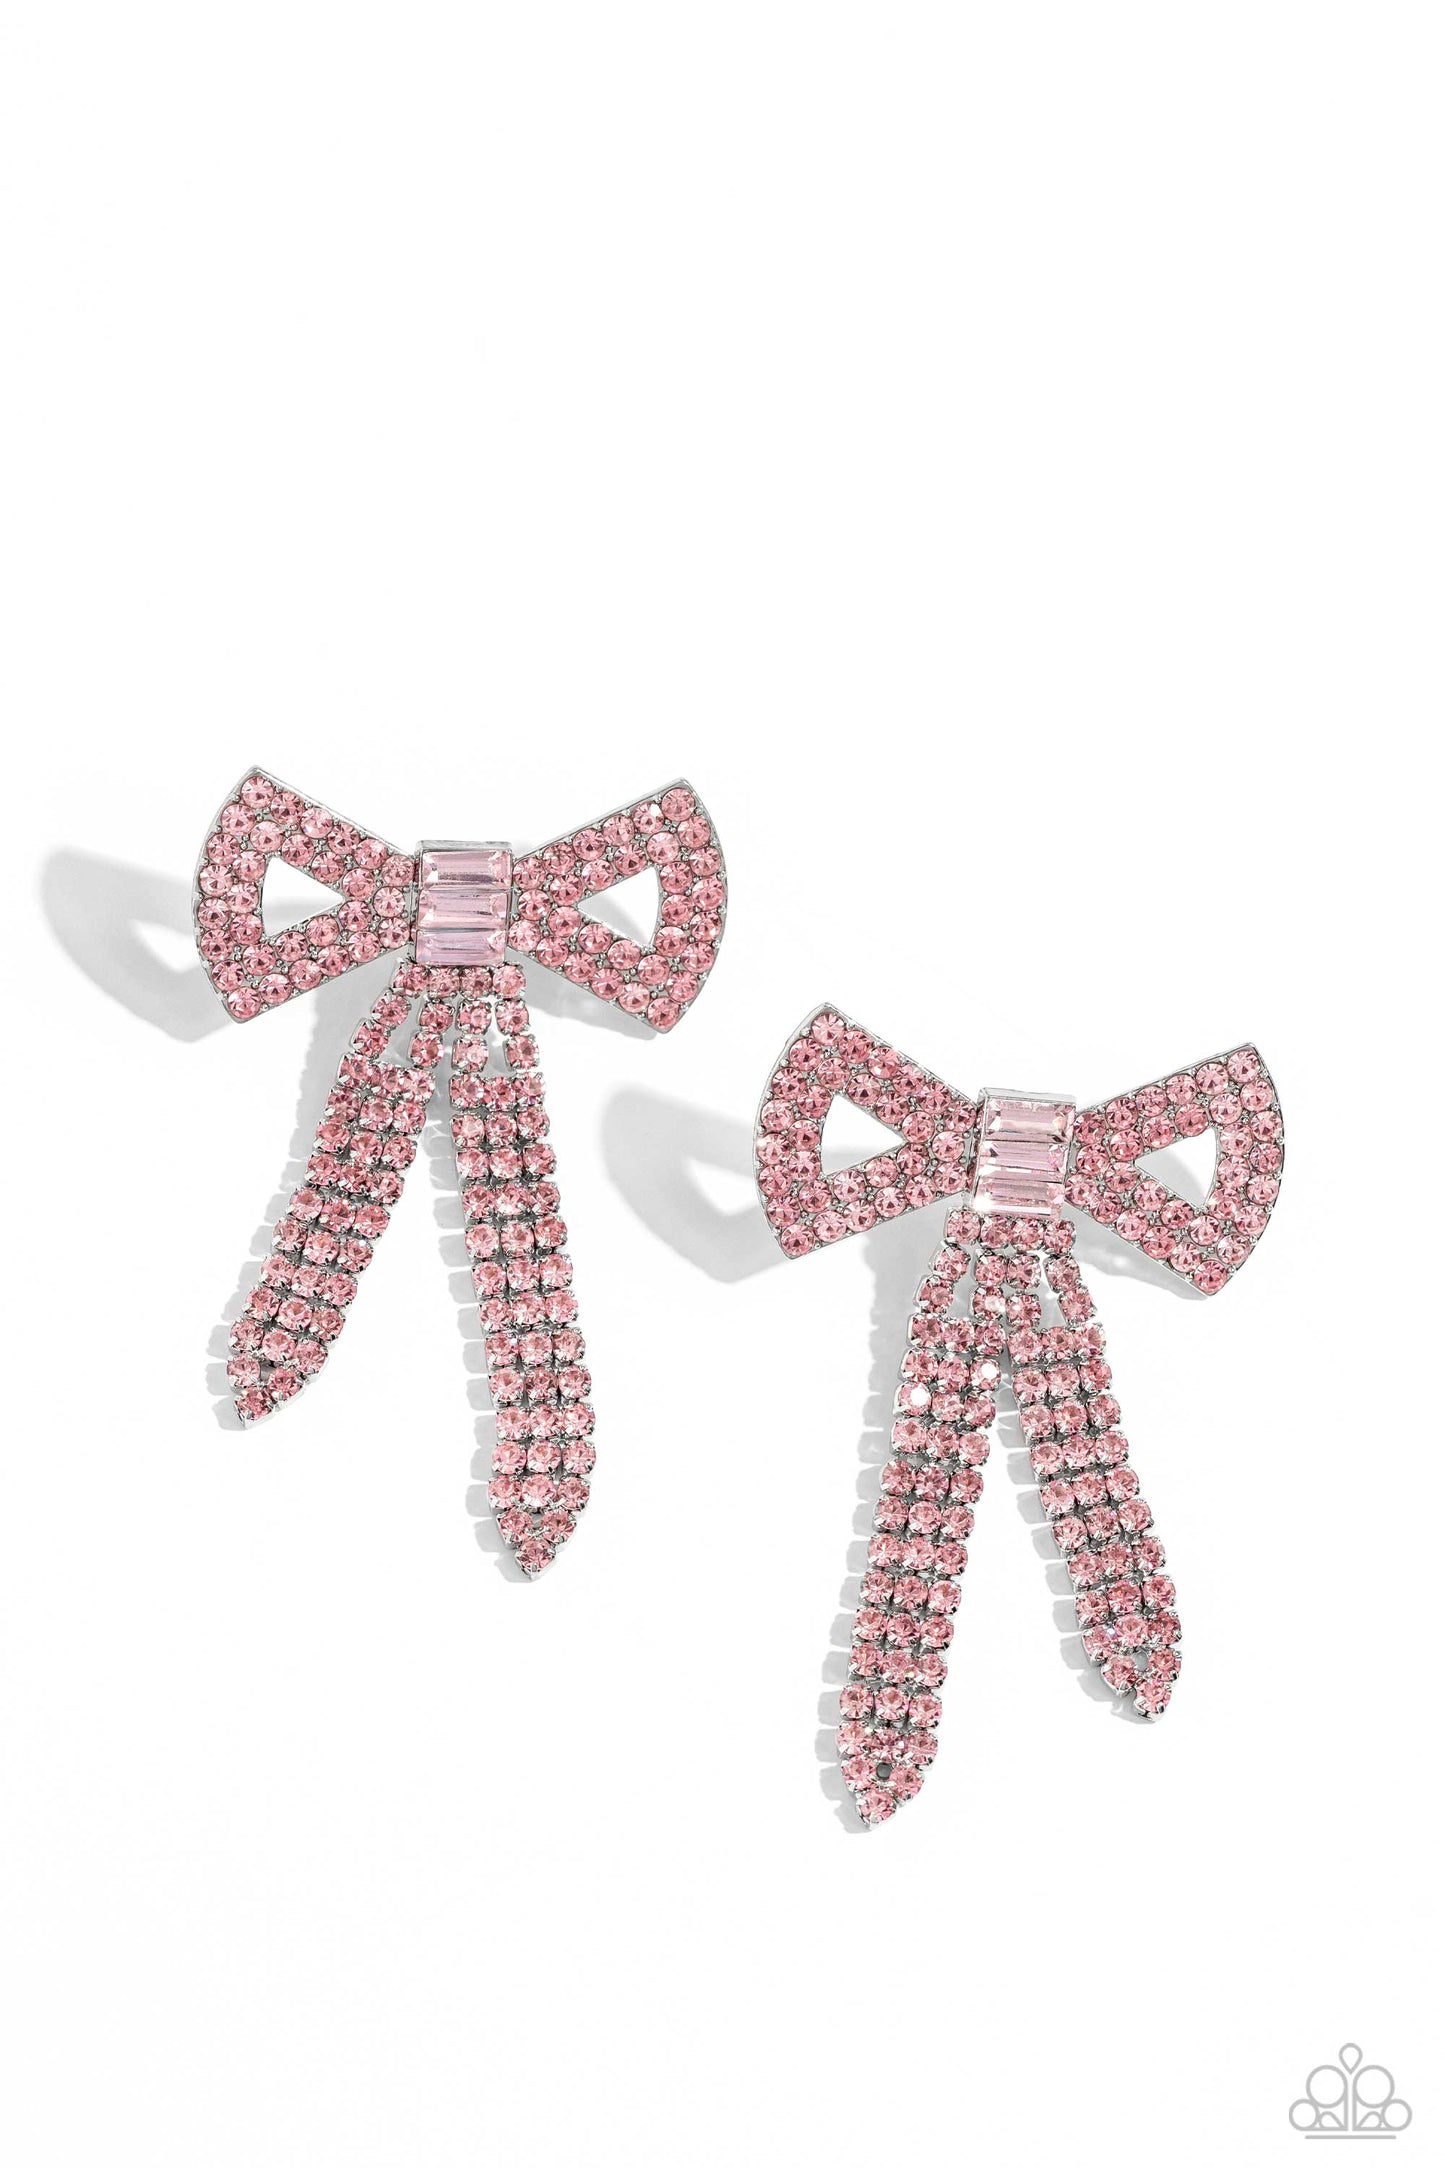 Just BOW With It Pink Post Earring - Paparazzi Accessories  Featuring silver square fittings, high-sheen bands of silver, adorned in sparkling pink rhinestones loop into a stunning bow charm, creating a classy statement at the ear. Featured in the center of the classy design, a trio of emerald-cut pink gems tie the bow together emitting further sheen and glitz. Earring attaches to a standard post fitting.  Sold as one pair of post earrings.  P5PO-PKXX-091XX